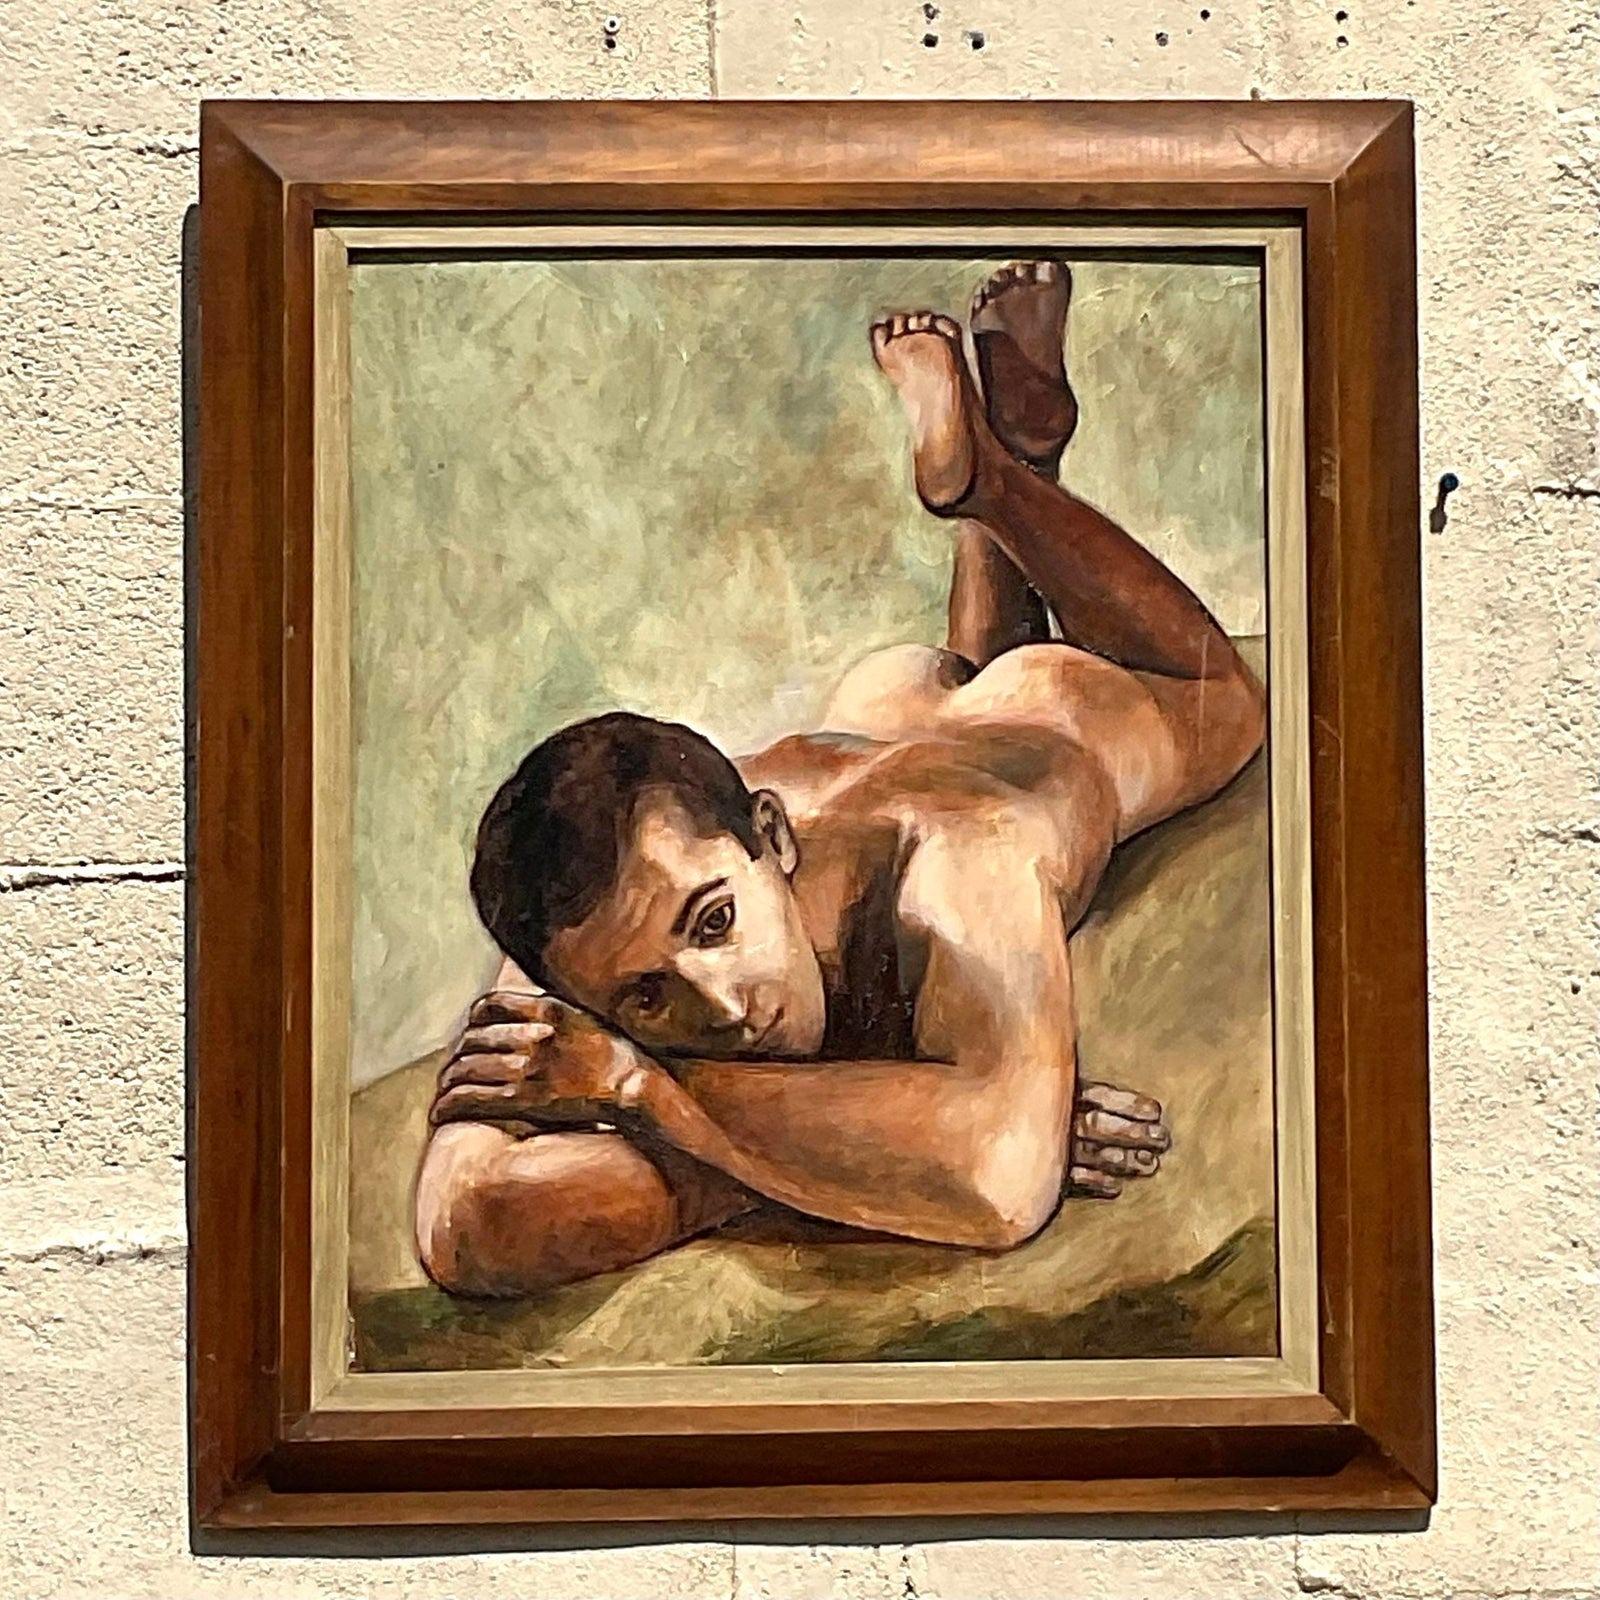 A stunning vintage Boho original oil painting. A chic male nude signed and dated 1962. Beautiful vintage frame. Acquired from a Palm Beach estate.